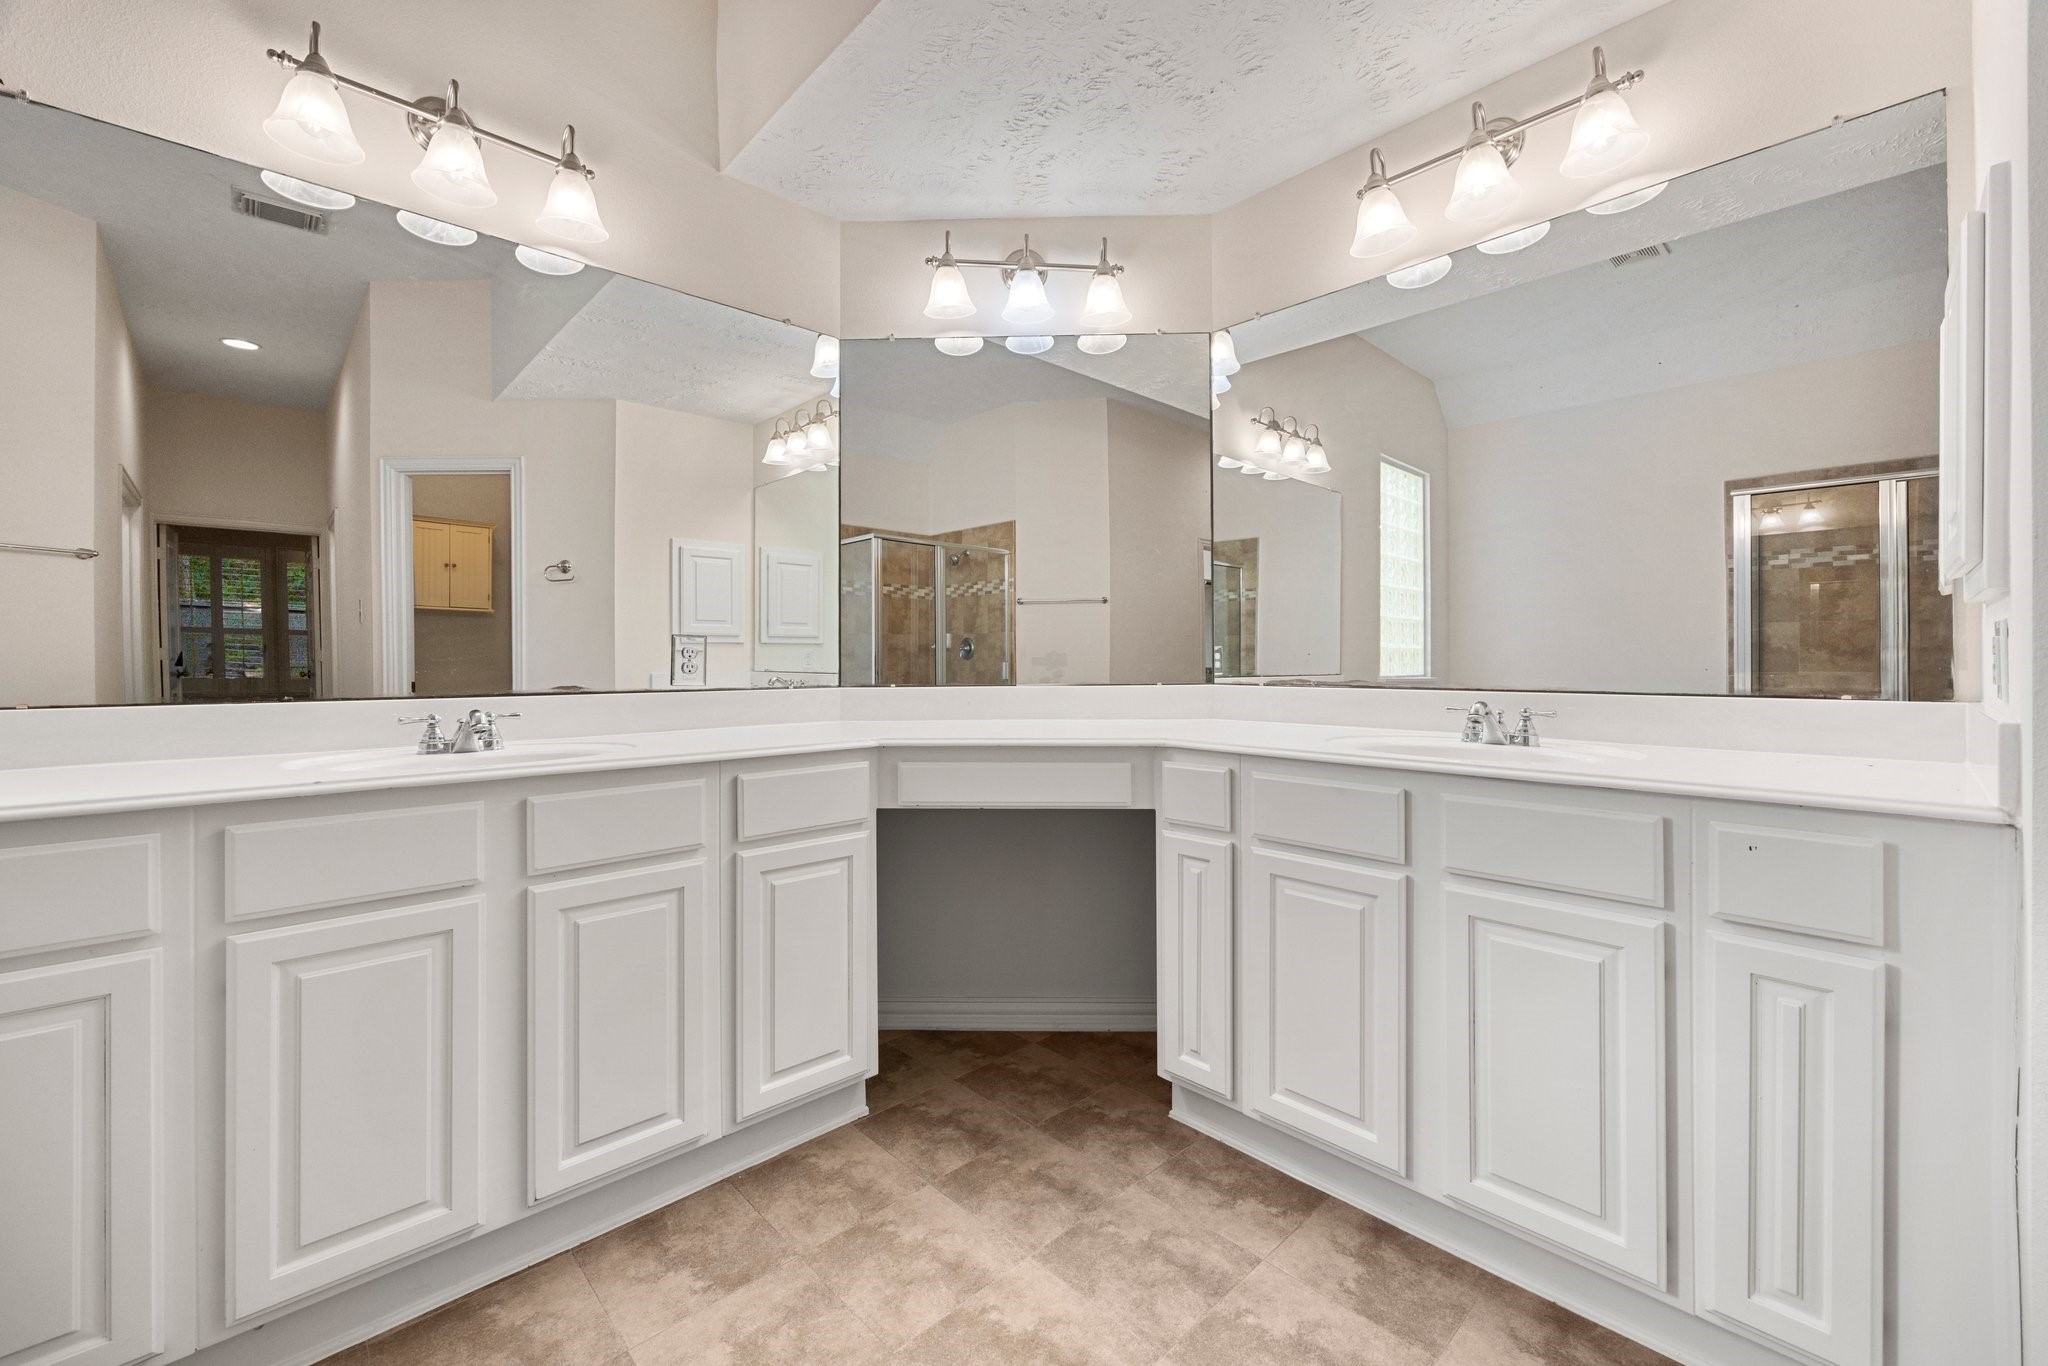 Soaker tub and vanity area